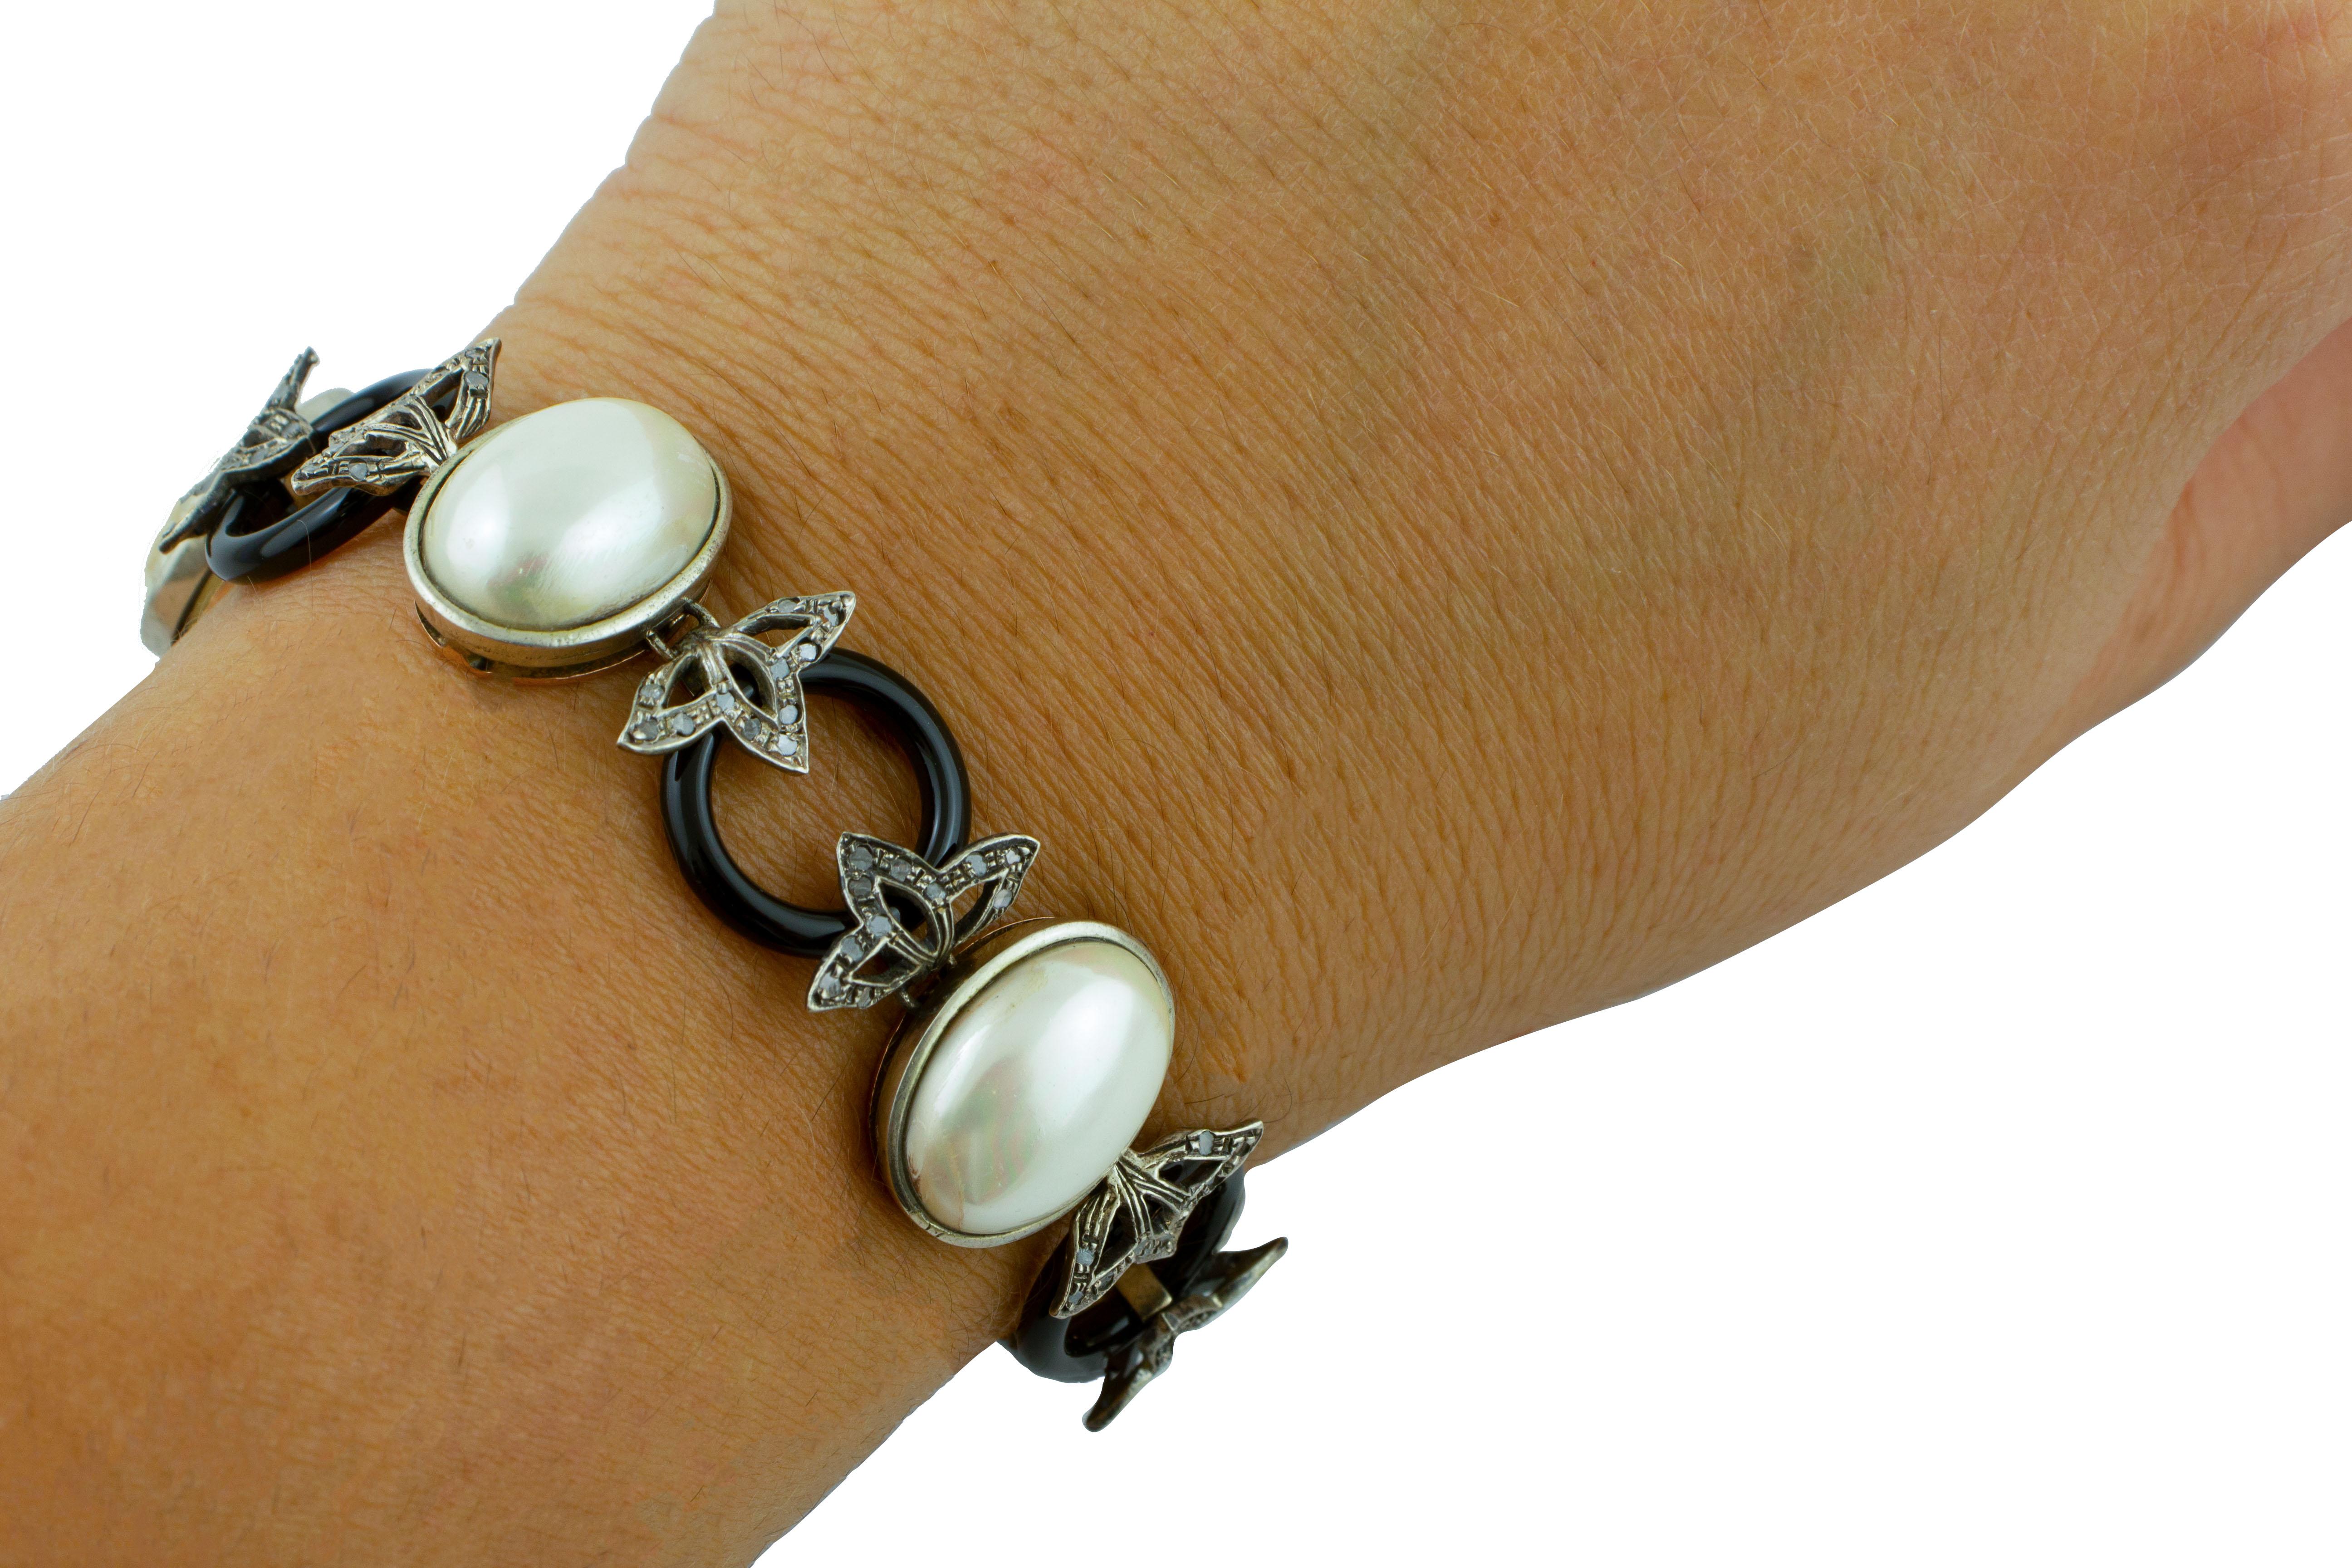 Women's Diamonds, Onyx Rings, White Pearls 9 Karat Rose Gold and Silver Link Bracelet For Sale